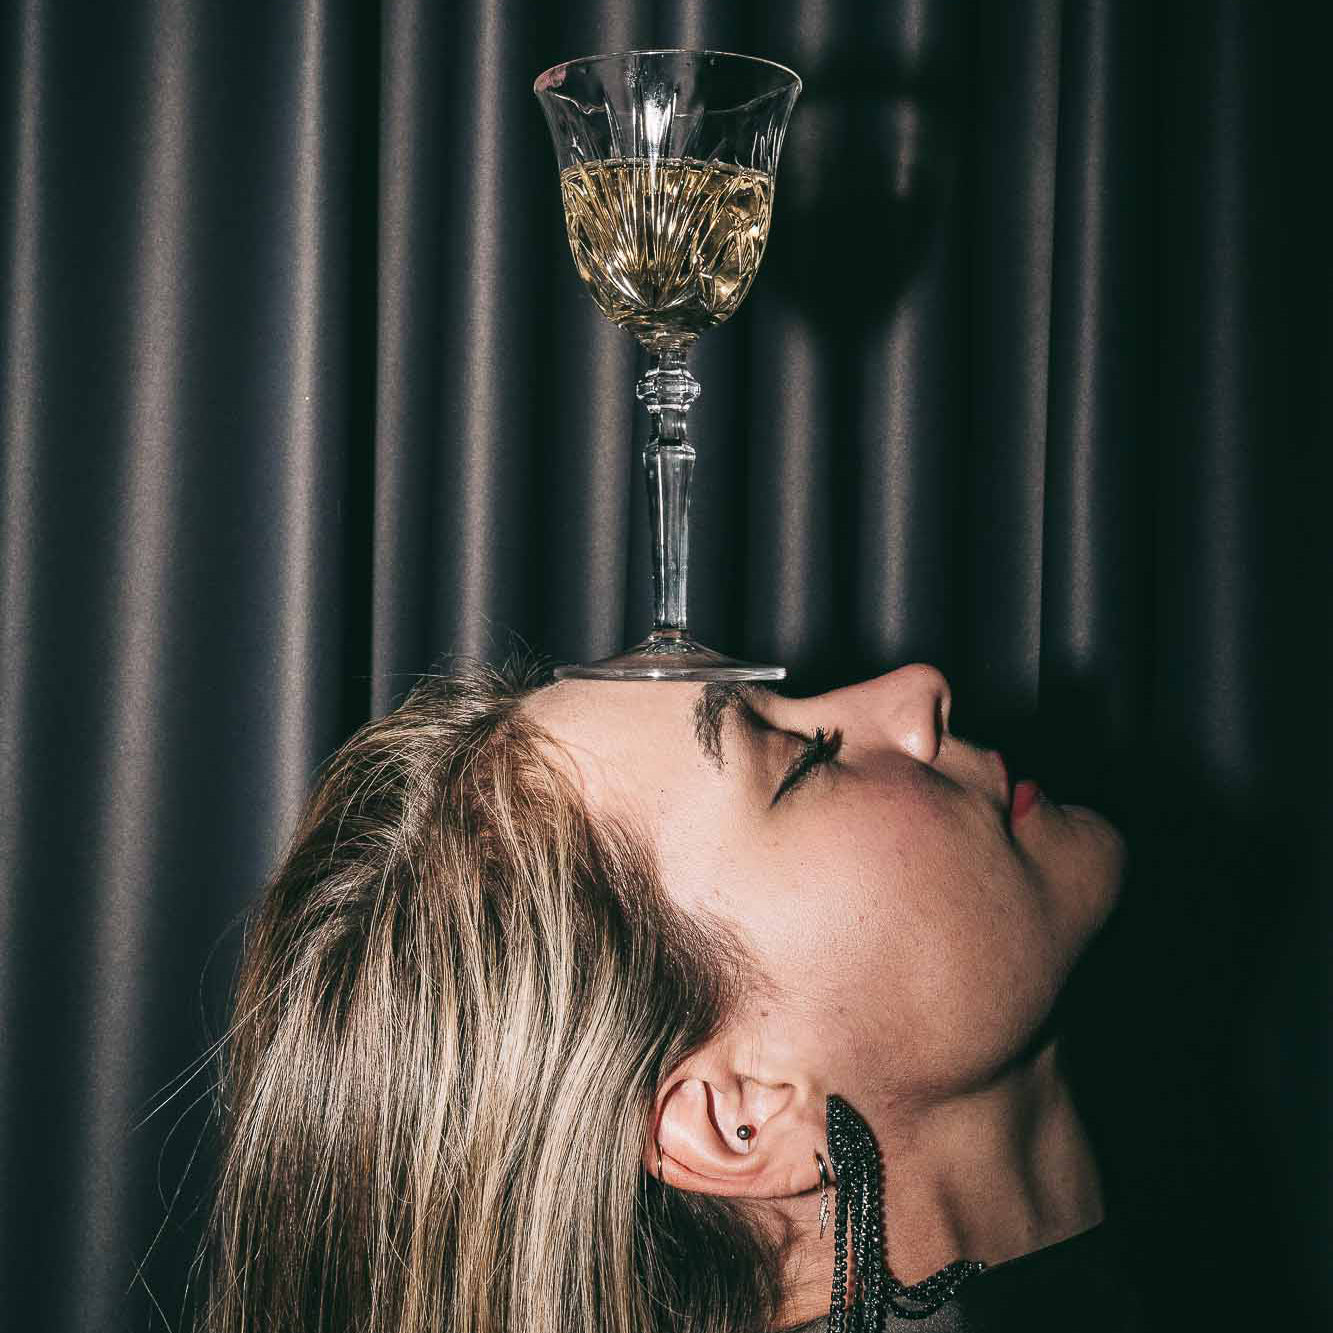 Woman with glass of LVST & FEAST balancing on head